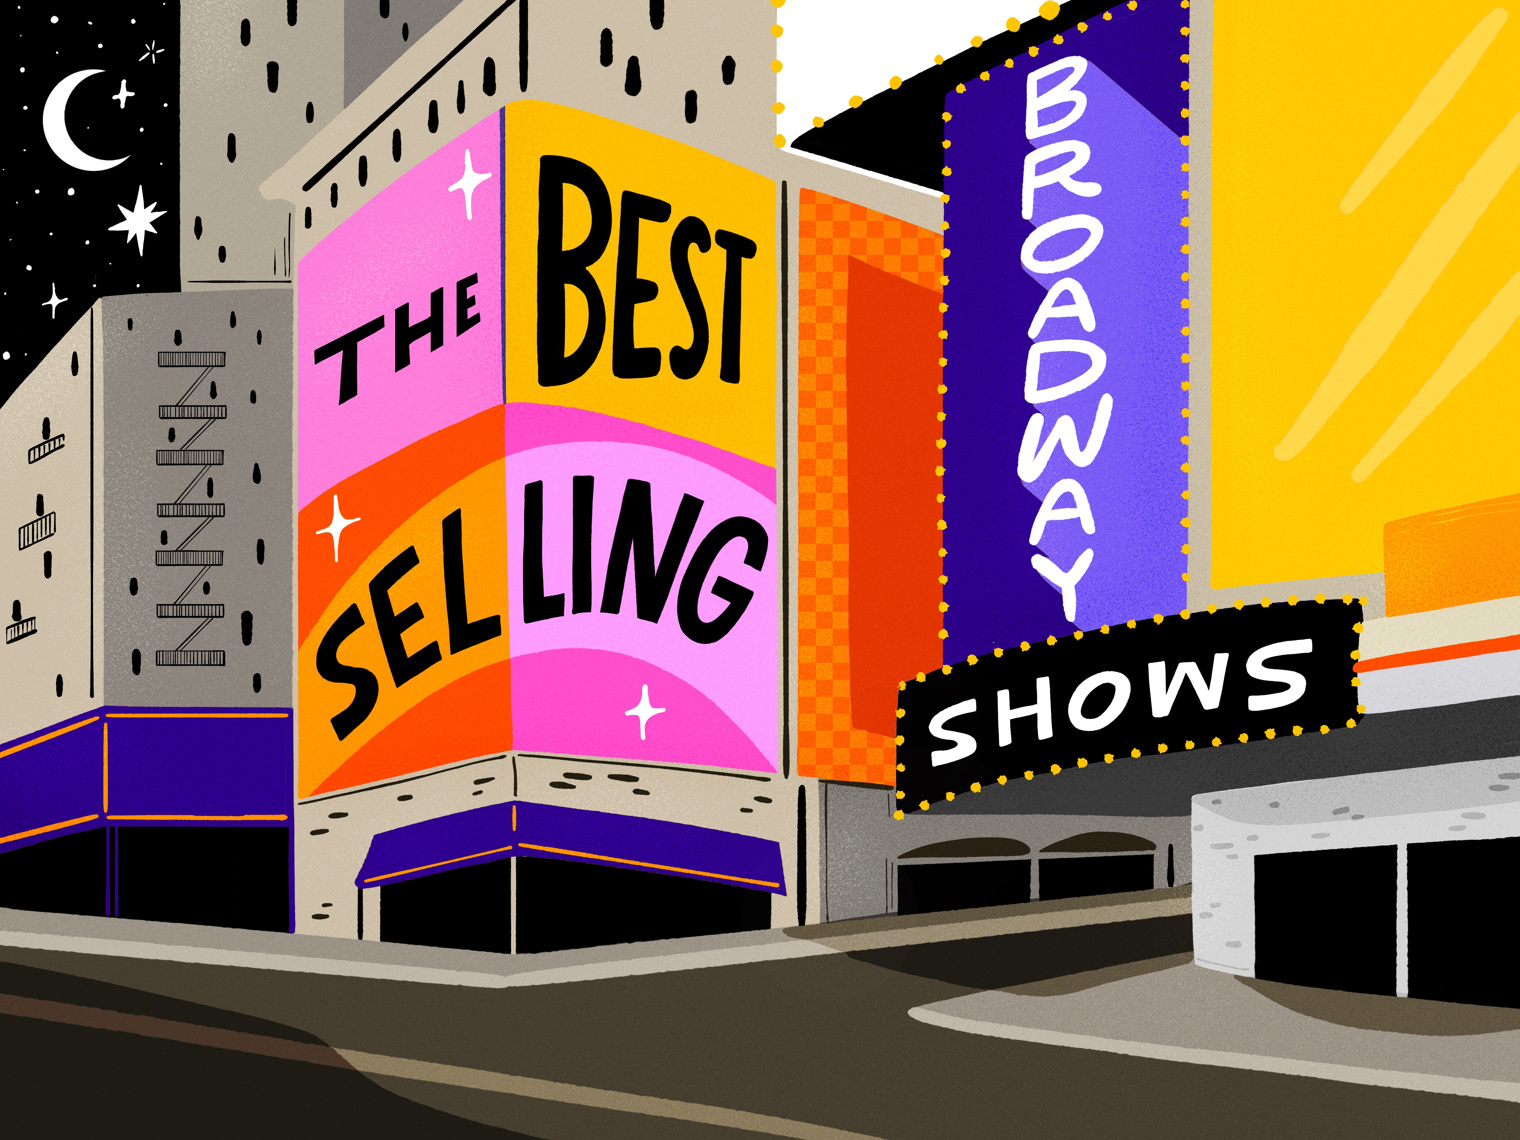 Lead image for the article Best Selling Broadway Shows